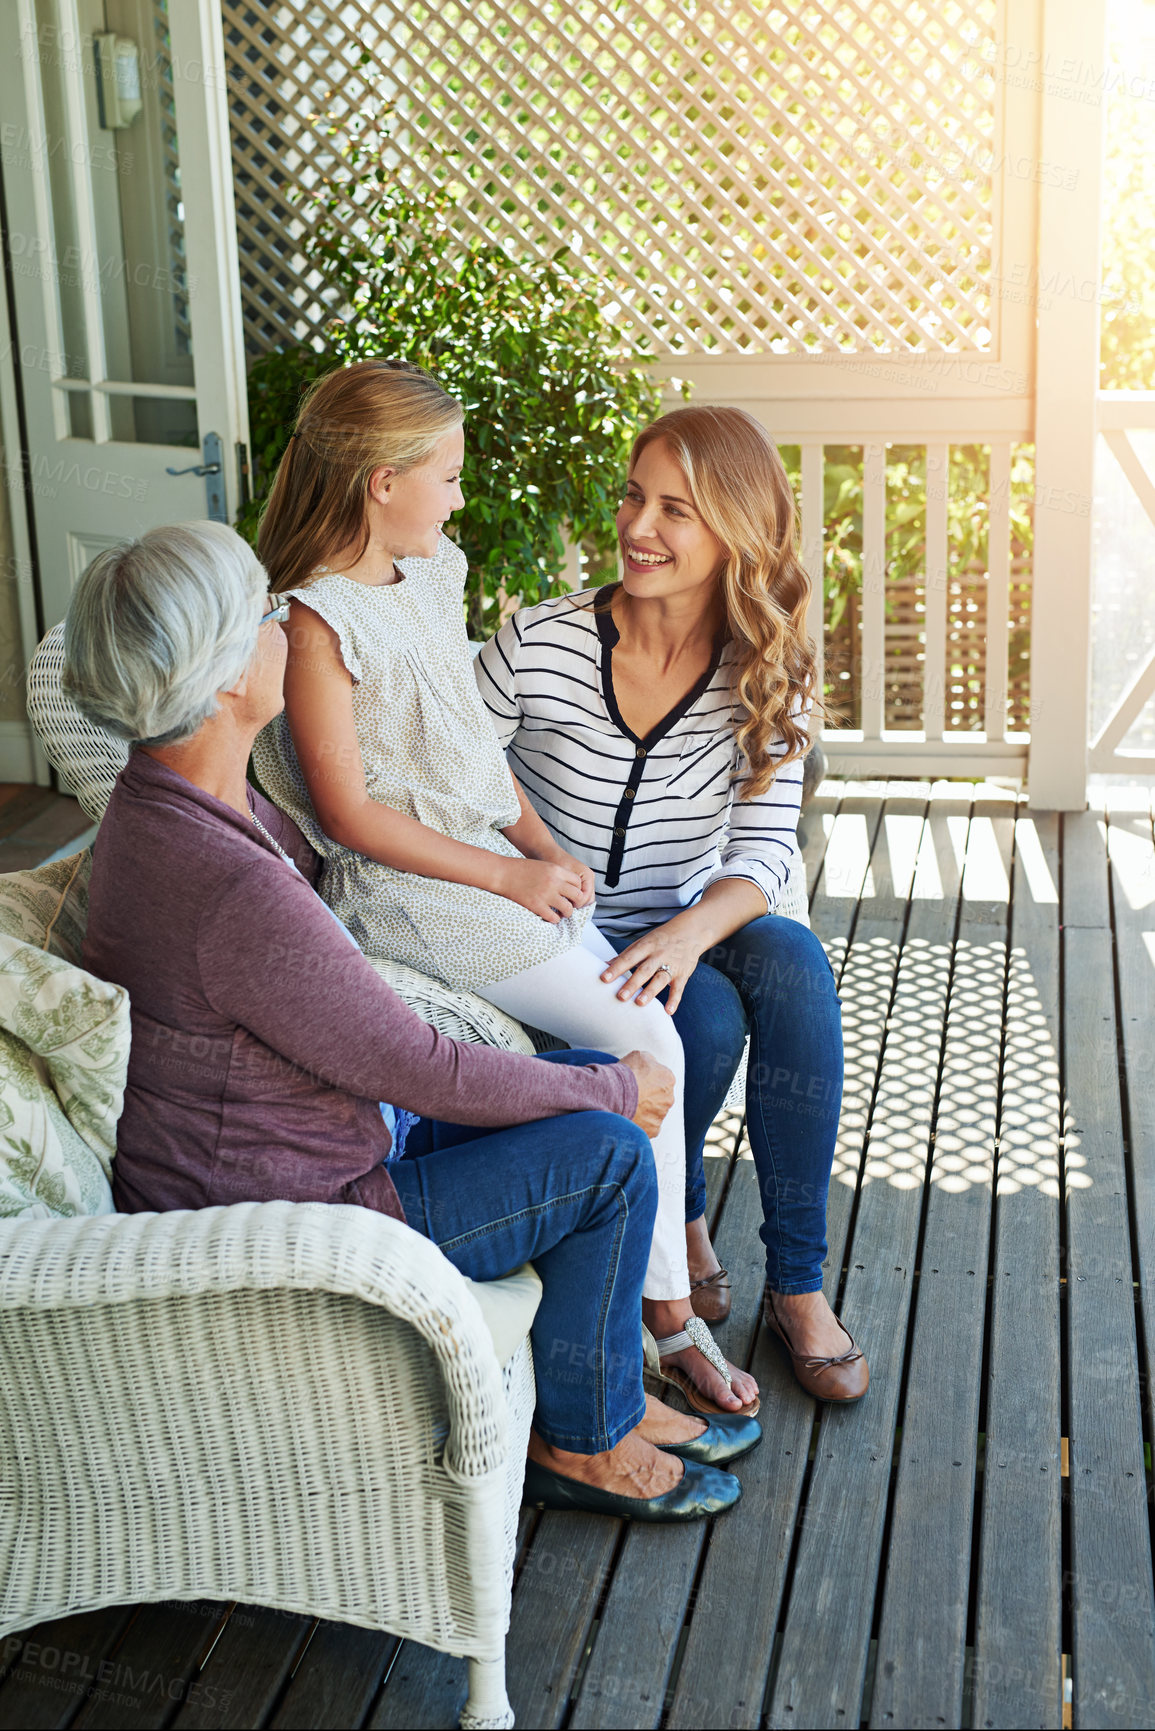 Buy stock photo Full length shot of a young girl sitting outside with her mother and grandmother